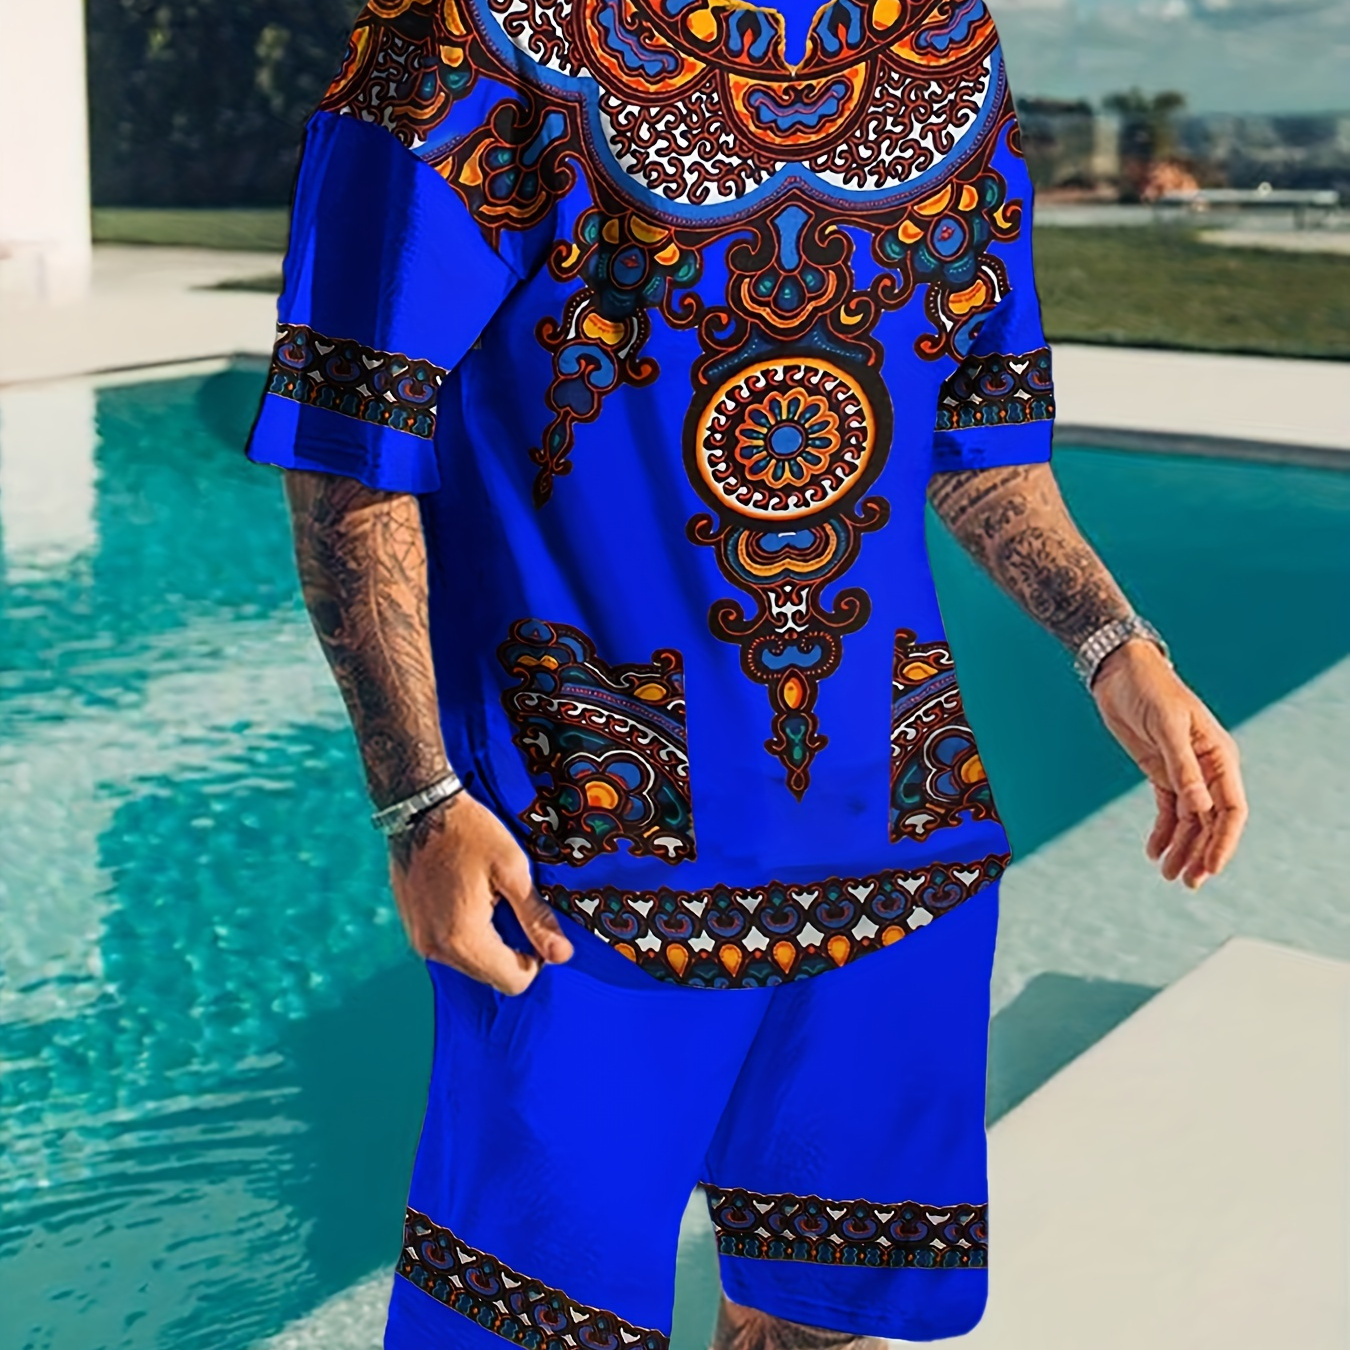 

Men's Novelty Comfortable Breathable Casual Sportswear 2-piece Set, Fashionable Loungewear With Vibrant Ethnic Pattern, Relaxed Fit Short Sleeve Top And Shorts Combo